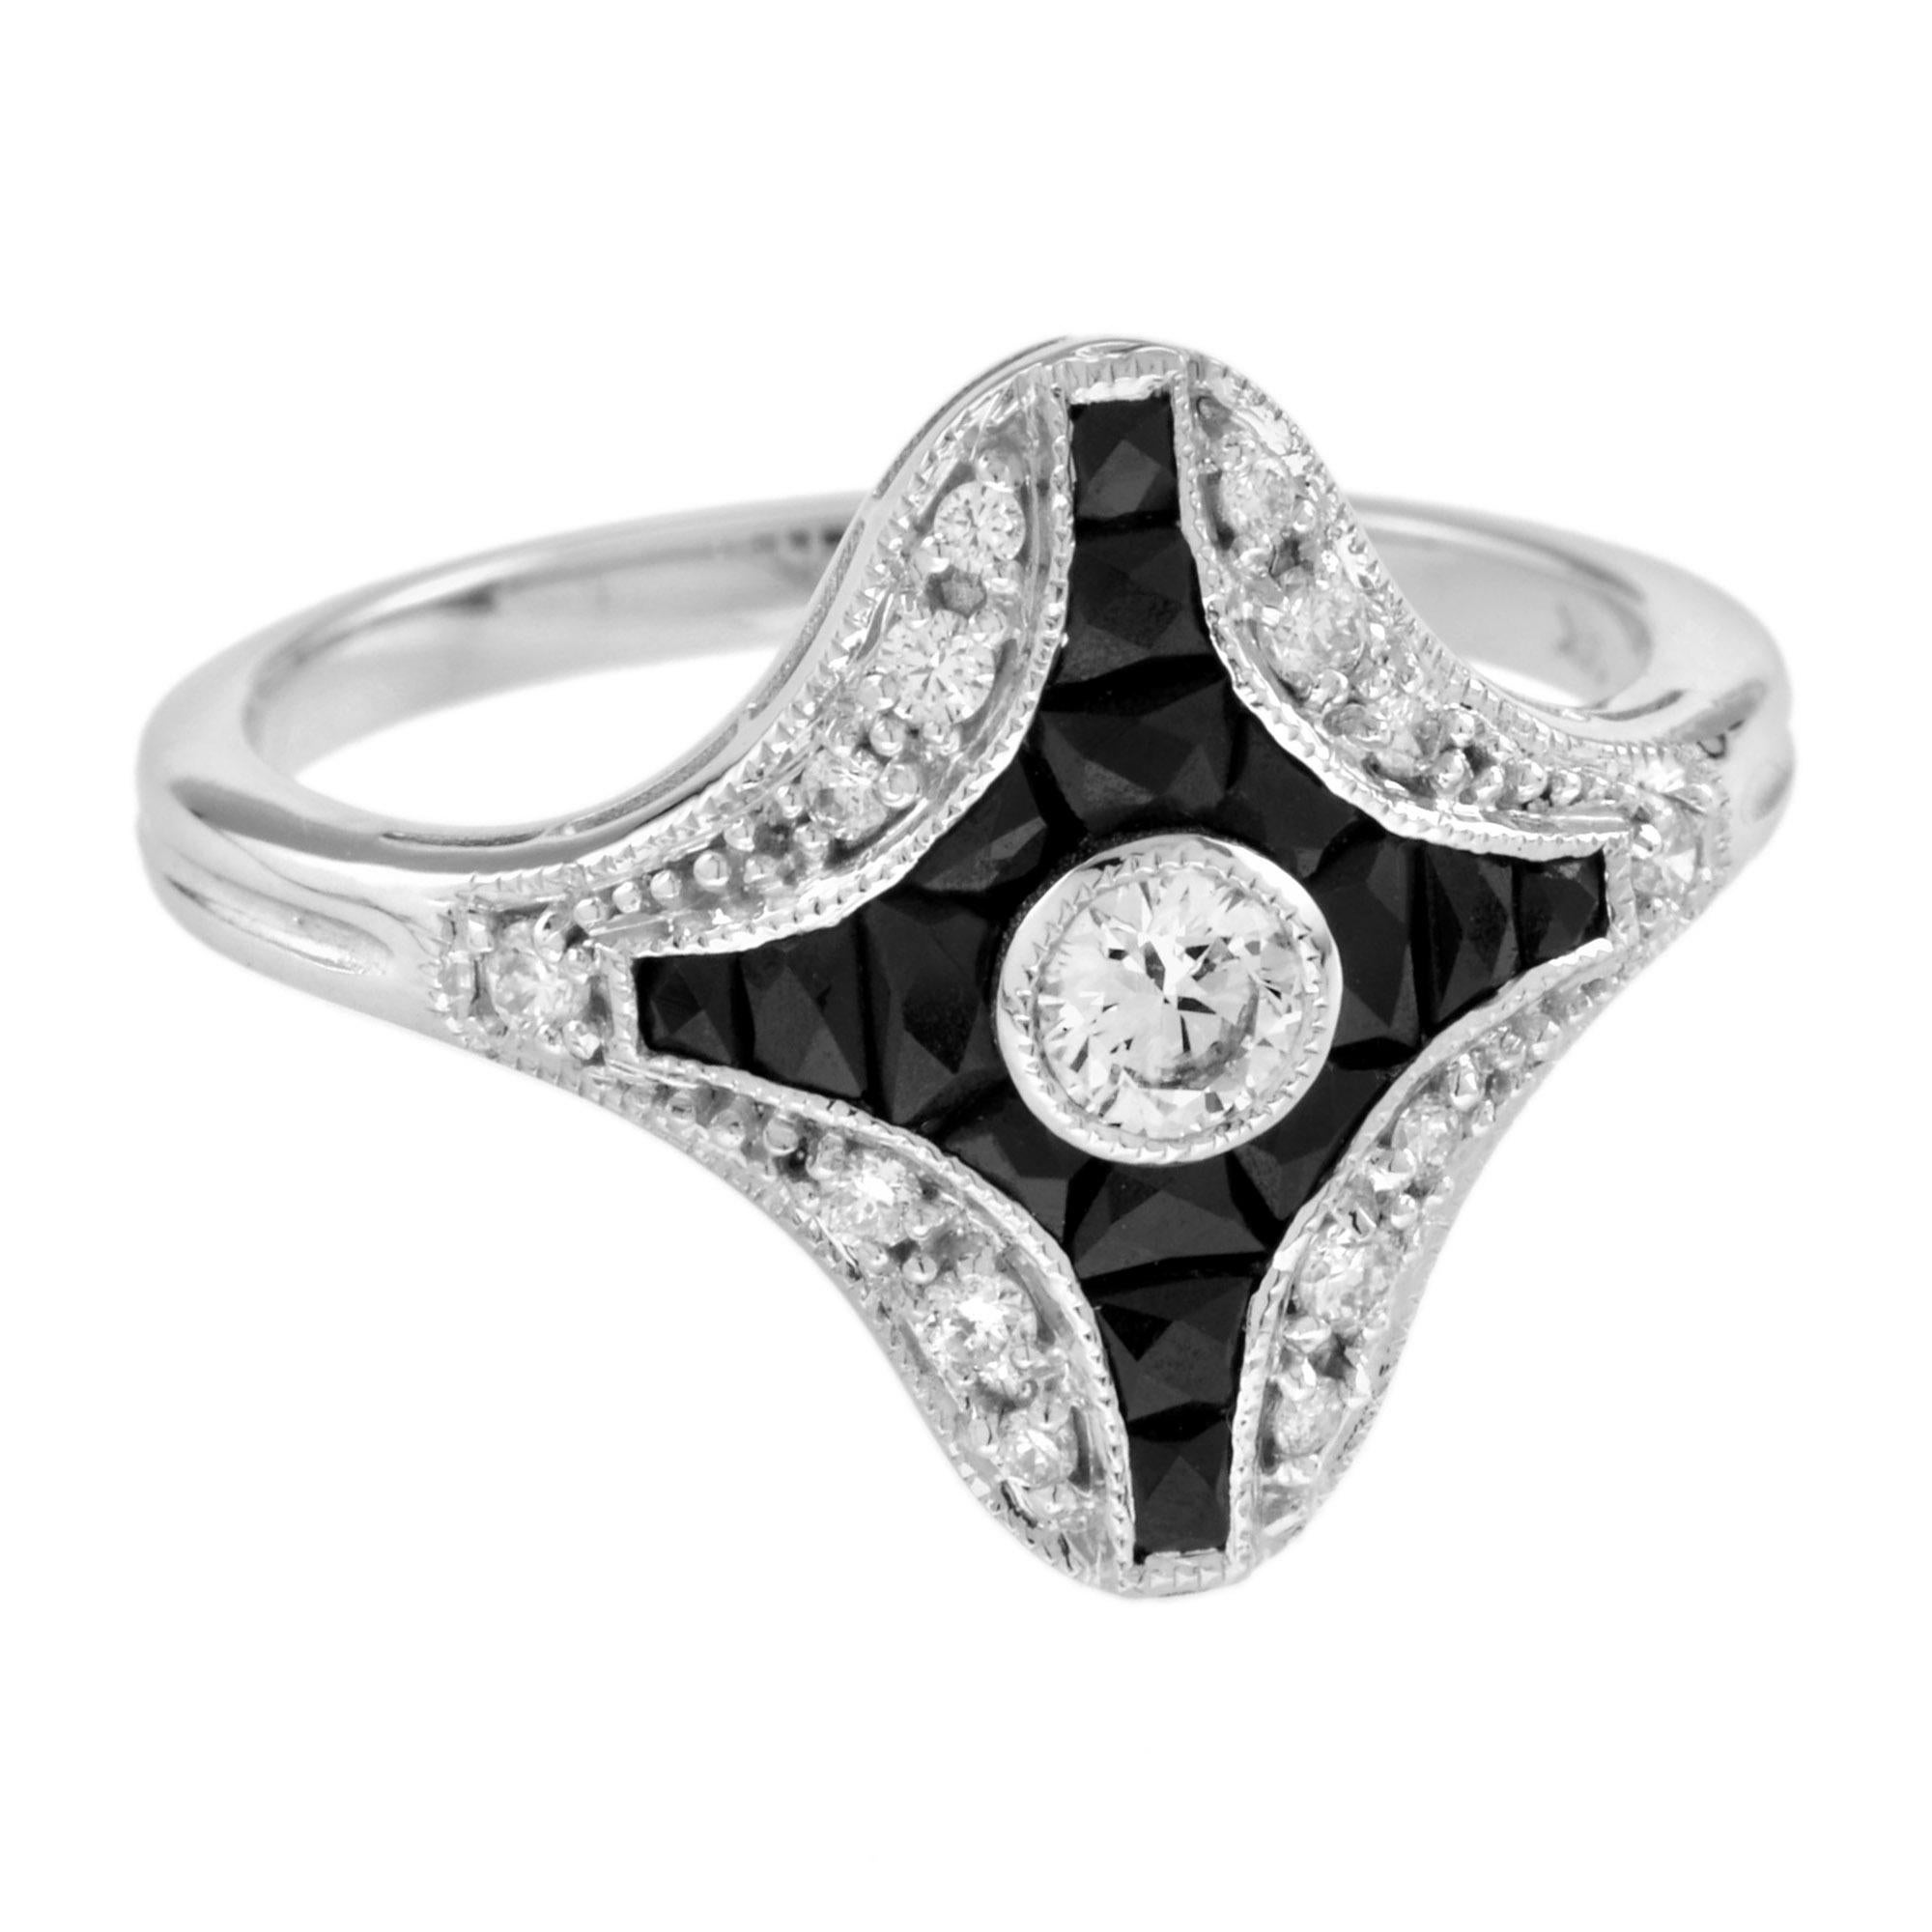 Art Deco inspired 14k white gold, with center H color SI clarity, round brilliant cut diamond. In additional, there are sixteen French cut onyxes. The ring also has additional diamond accent of .15 carat. It is an excellent choice for a stylish